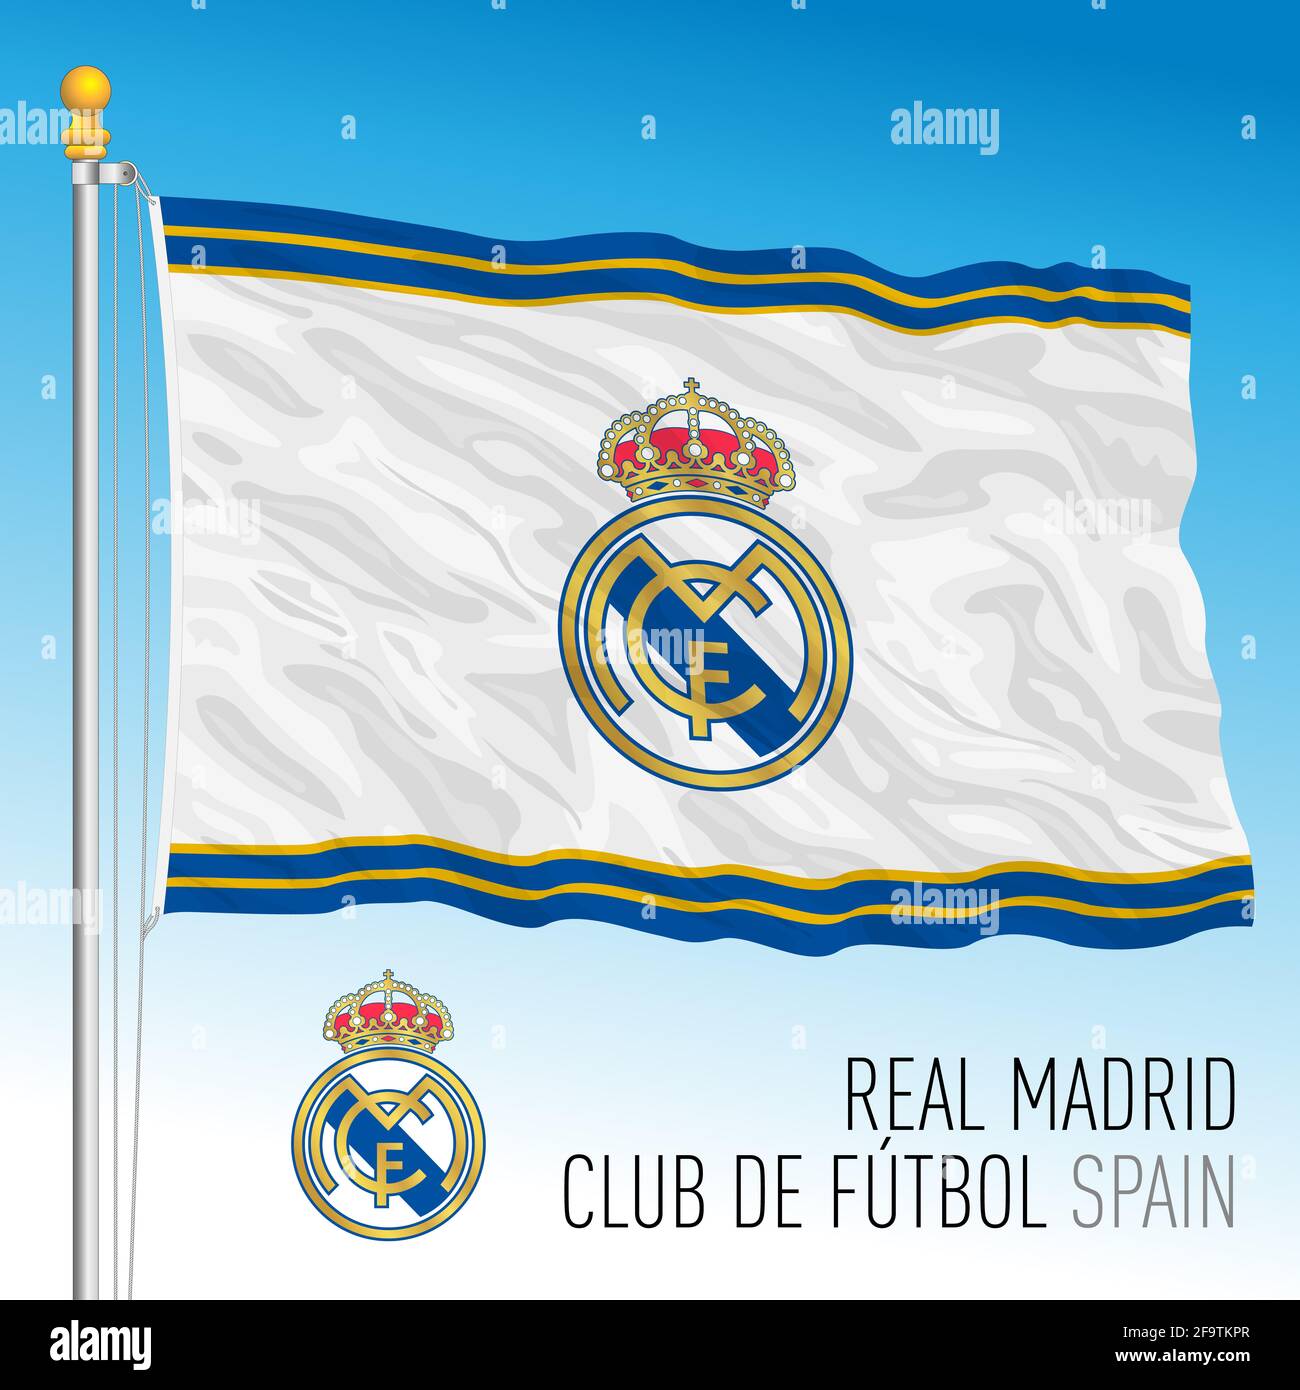 Europe, year 2021, Real Madrid Football Club flag and coat of arms team in  the new Super League championship, illustration Stock Photo - Alamy